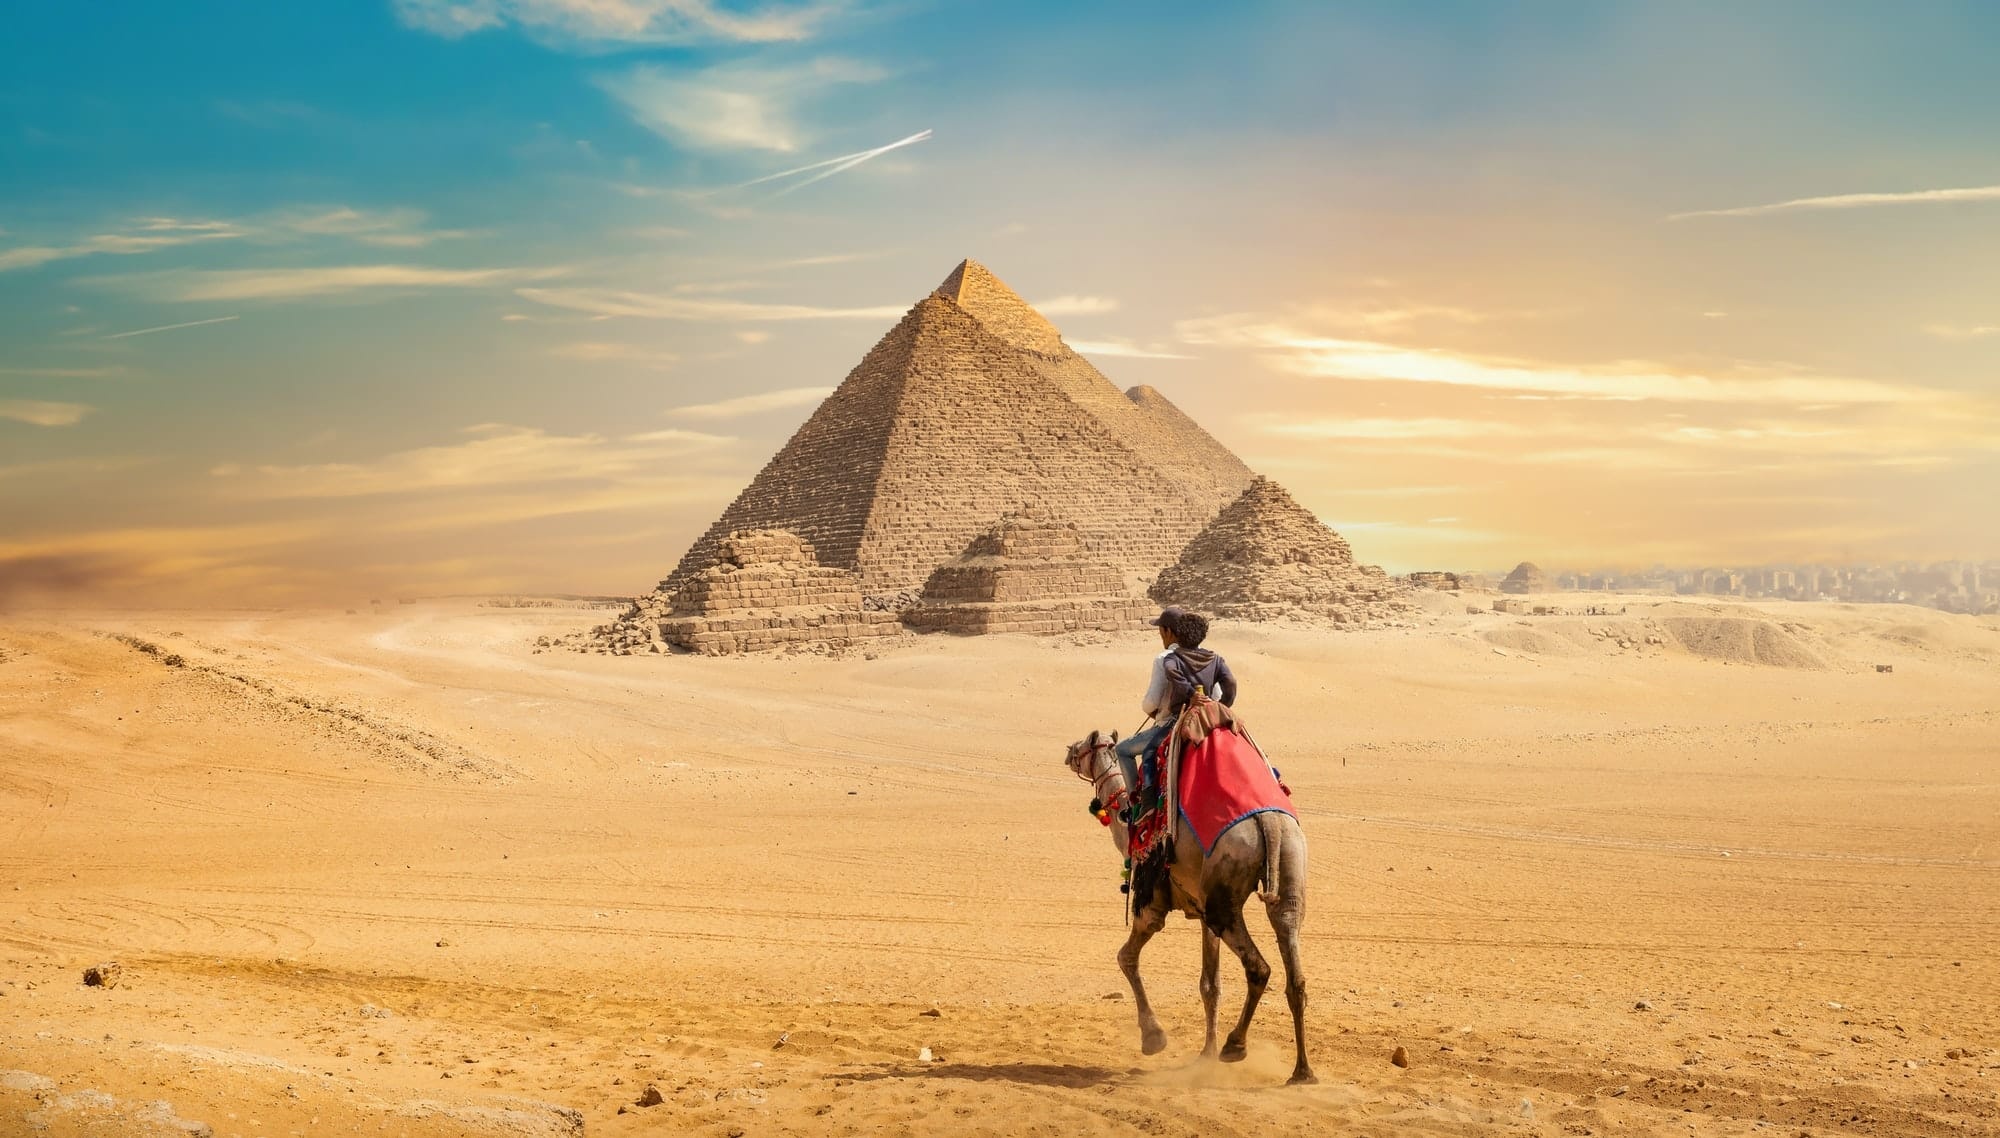 Pyramids of Giza, Ancient wonders, Egyptian history, Unforgettable visit, 2000x1140 HD Desktop